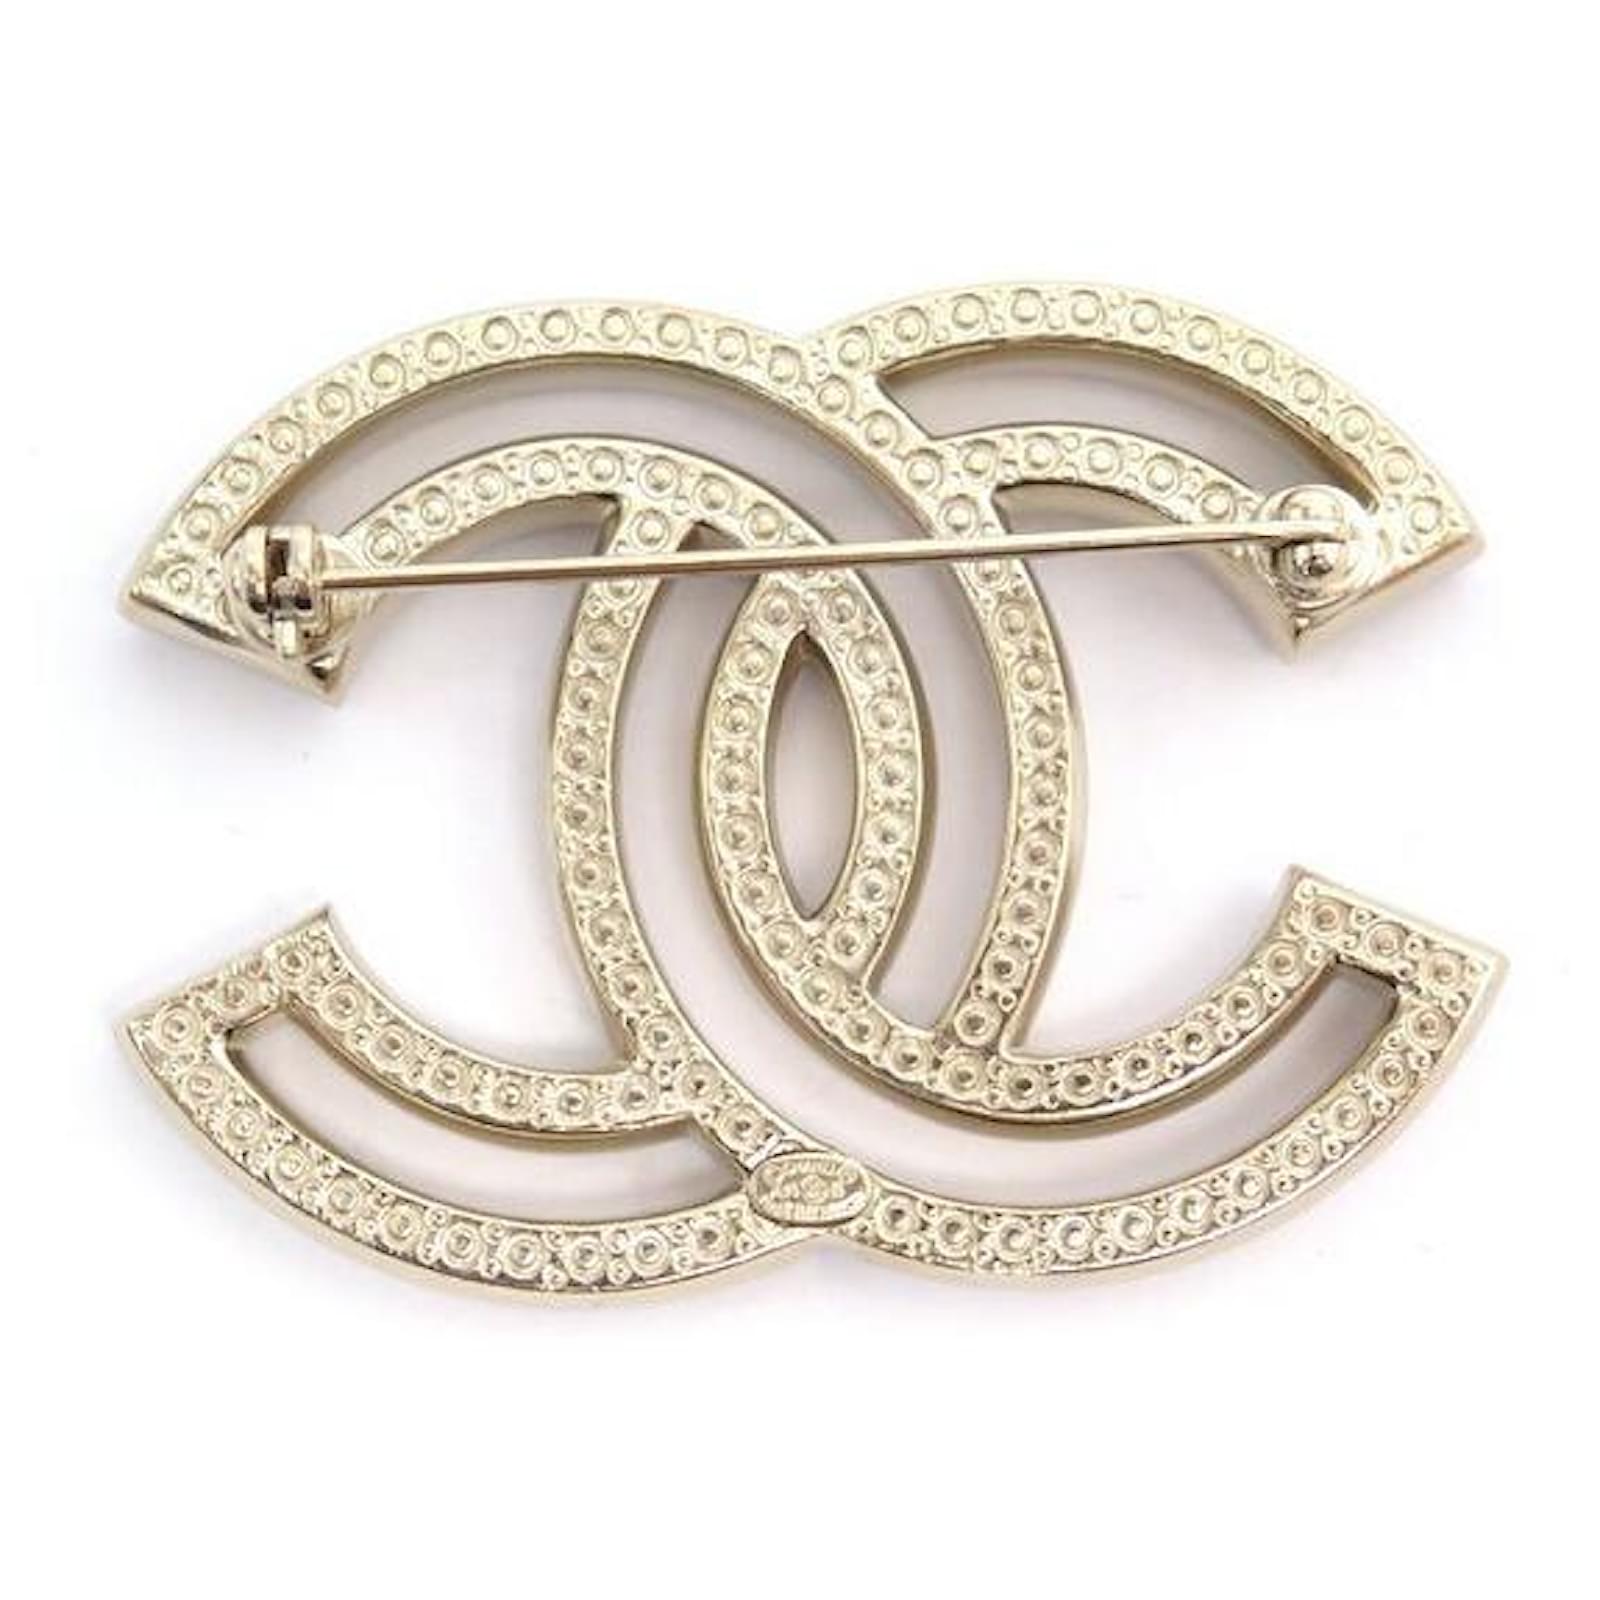 Other jewelry NEW CHANEL LOGO CC PEARLS & STRASS